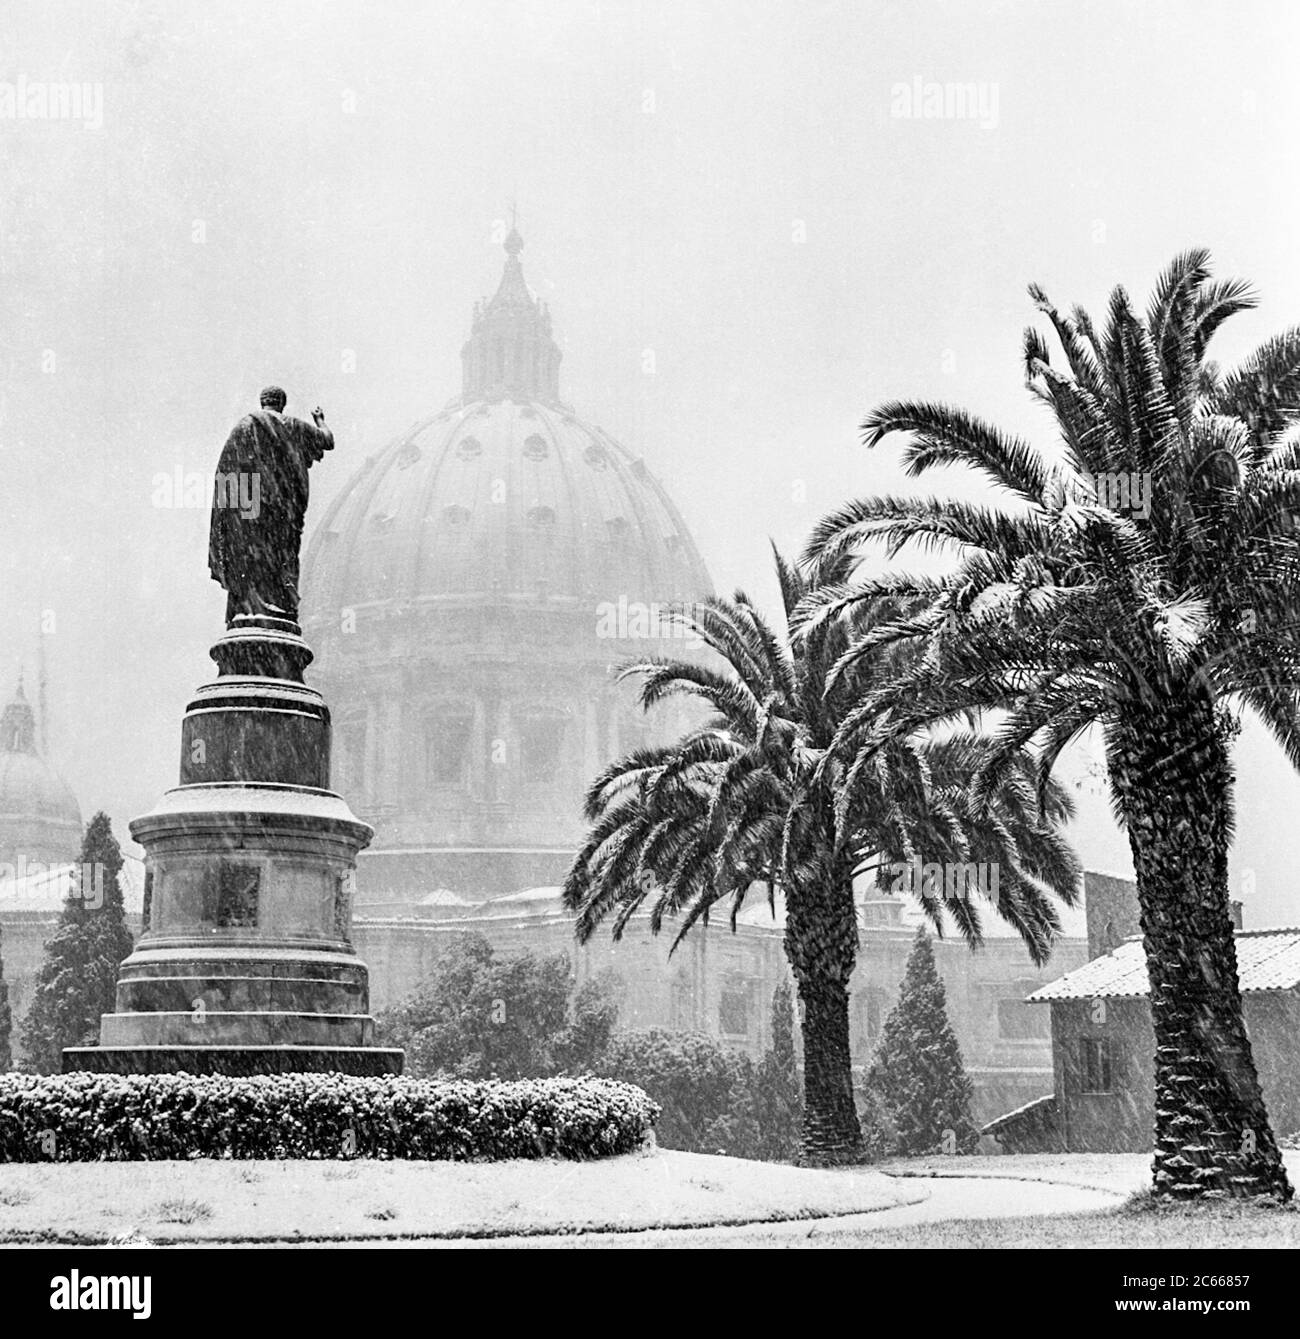 Vatican City The snowfall of February 2, 1956 in the Vatican during the pontificate of Pius XII Stock Photo